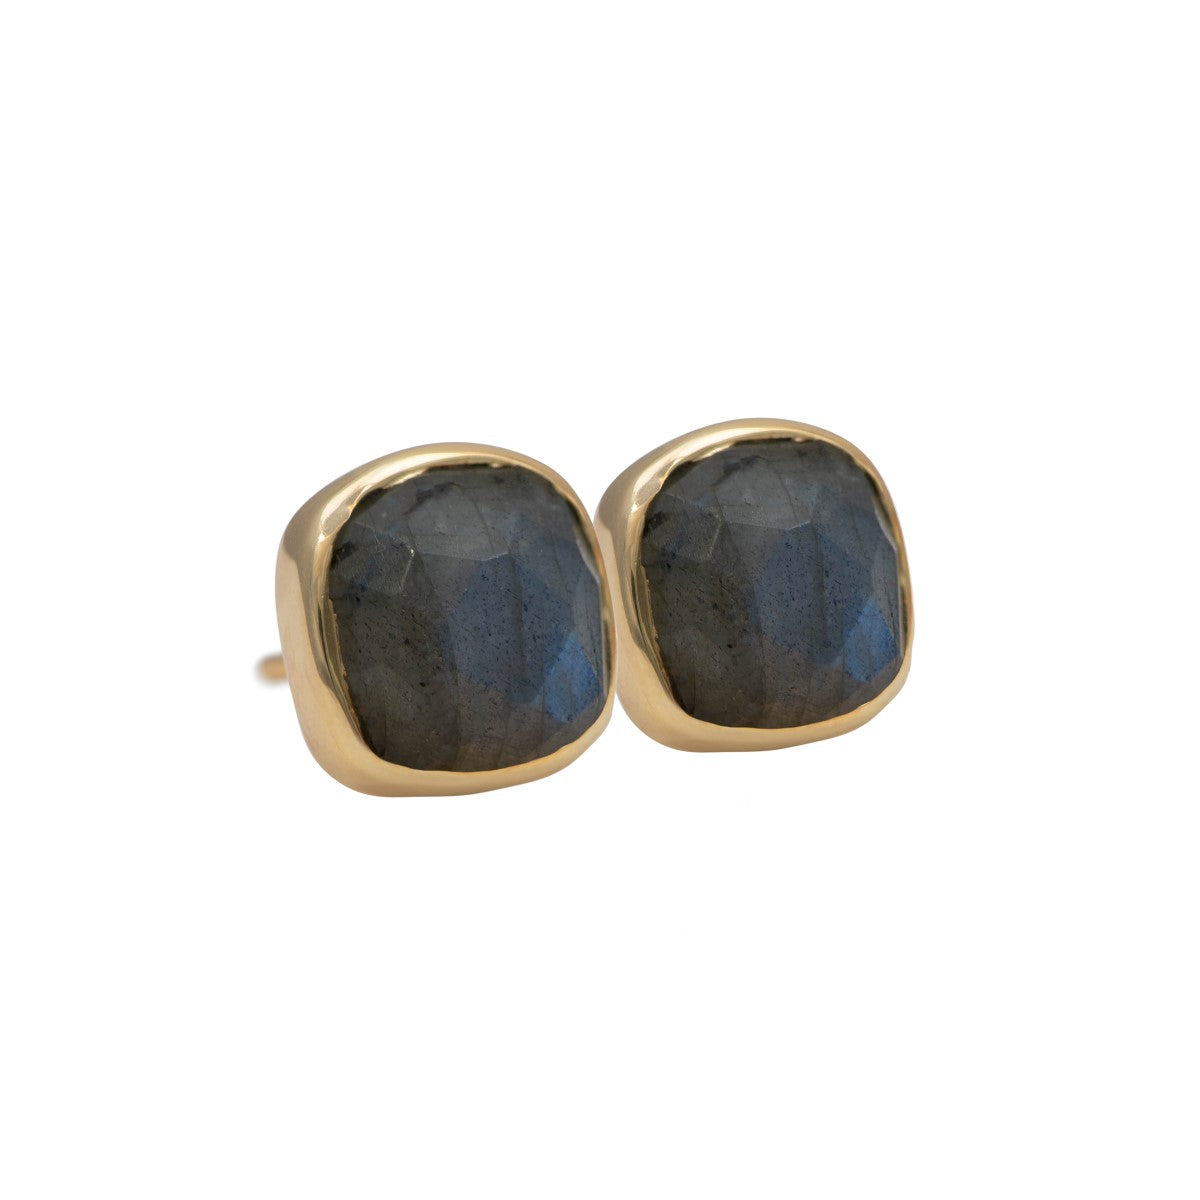 Faceted Square Labradorite Gemstone Stud Earrings in Gold Plated Sterling Silver